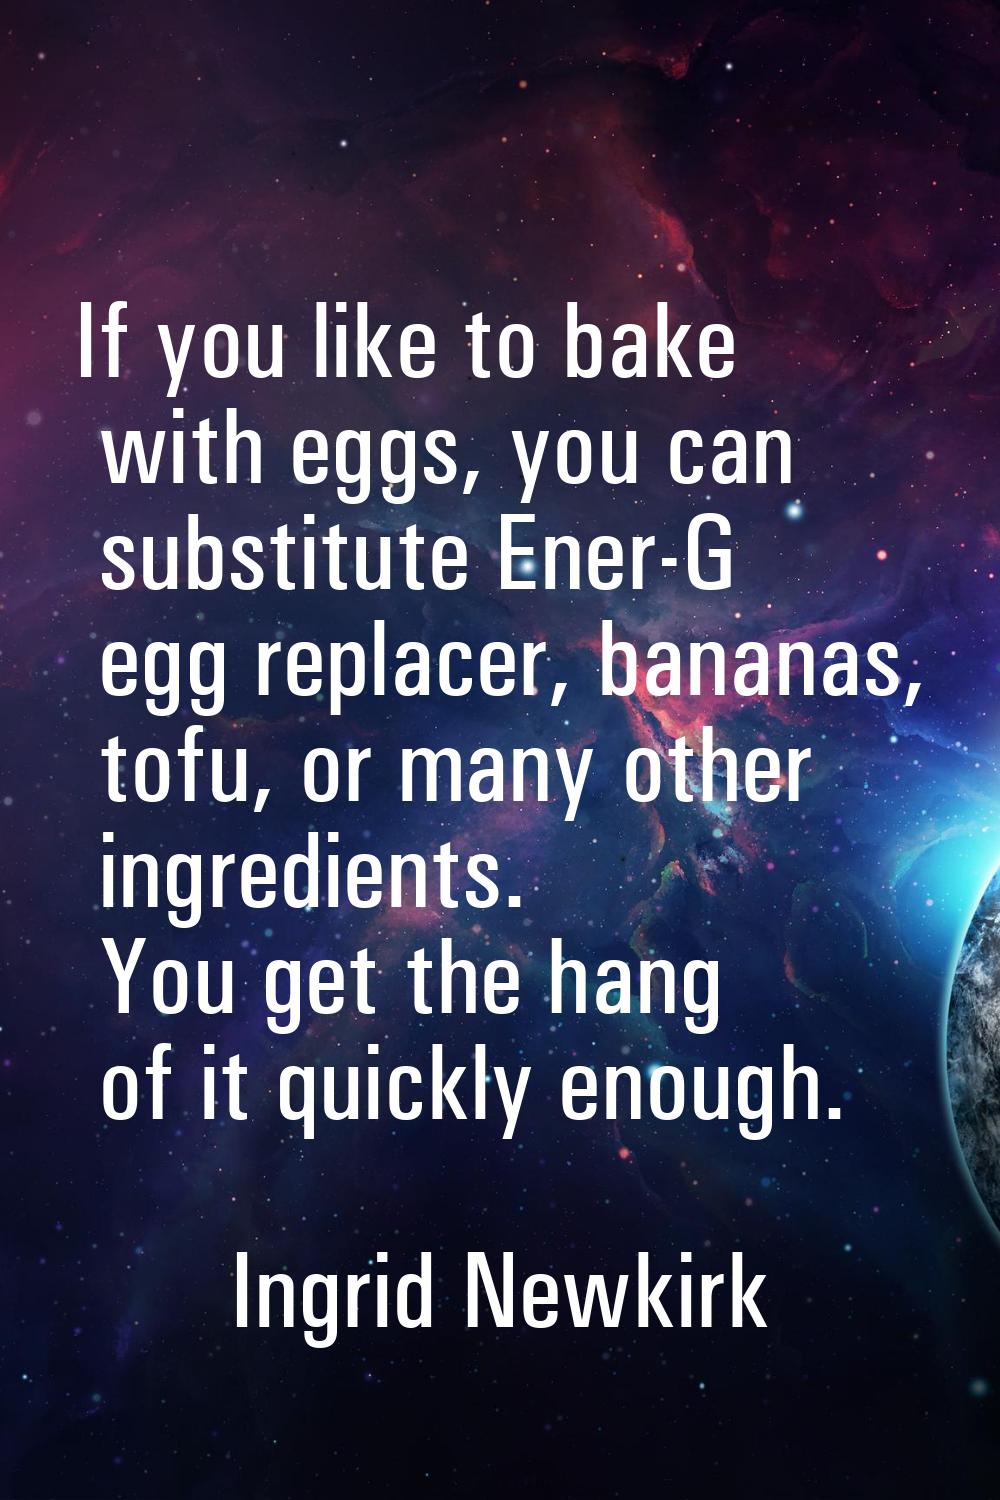 If you like to bake with eggs, you can substitute Ener-G egg replacer, bananas, tofu, or many other